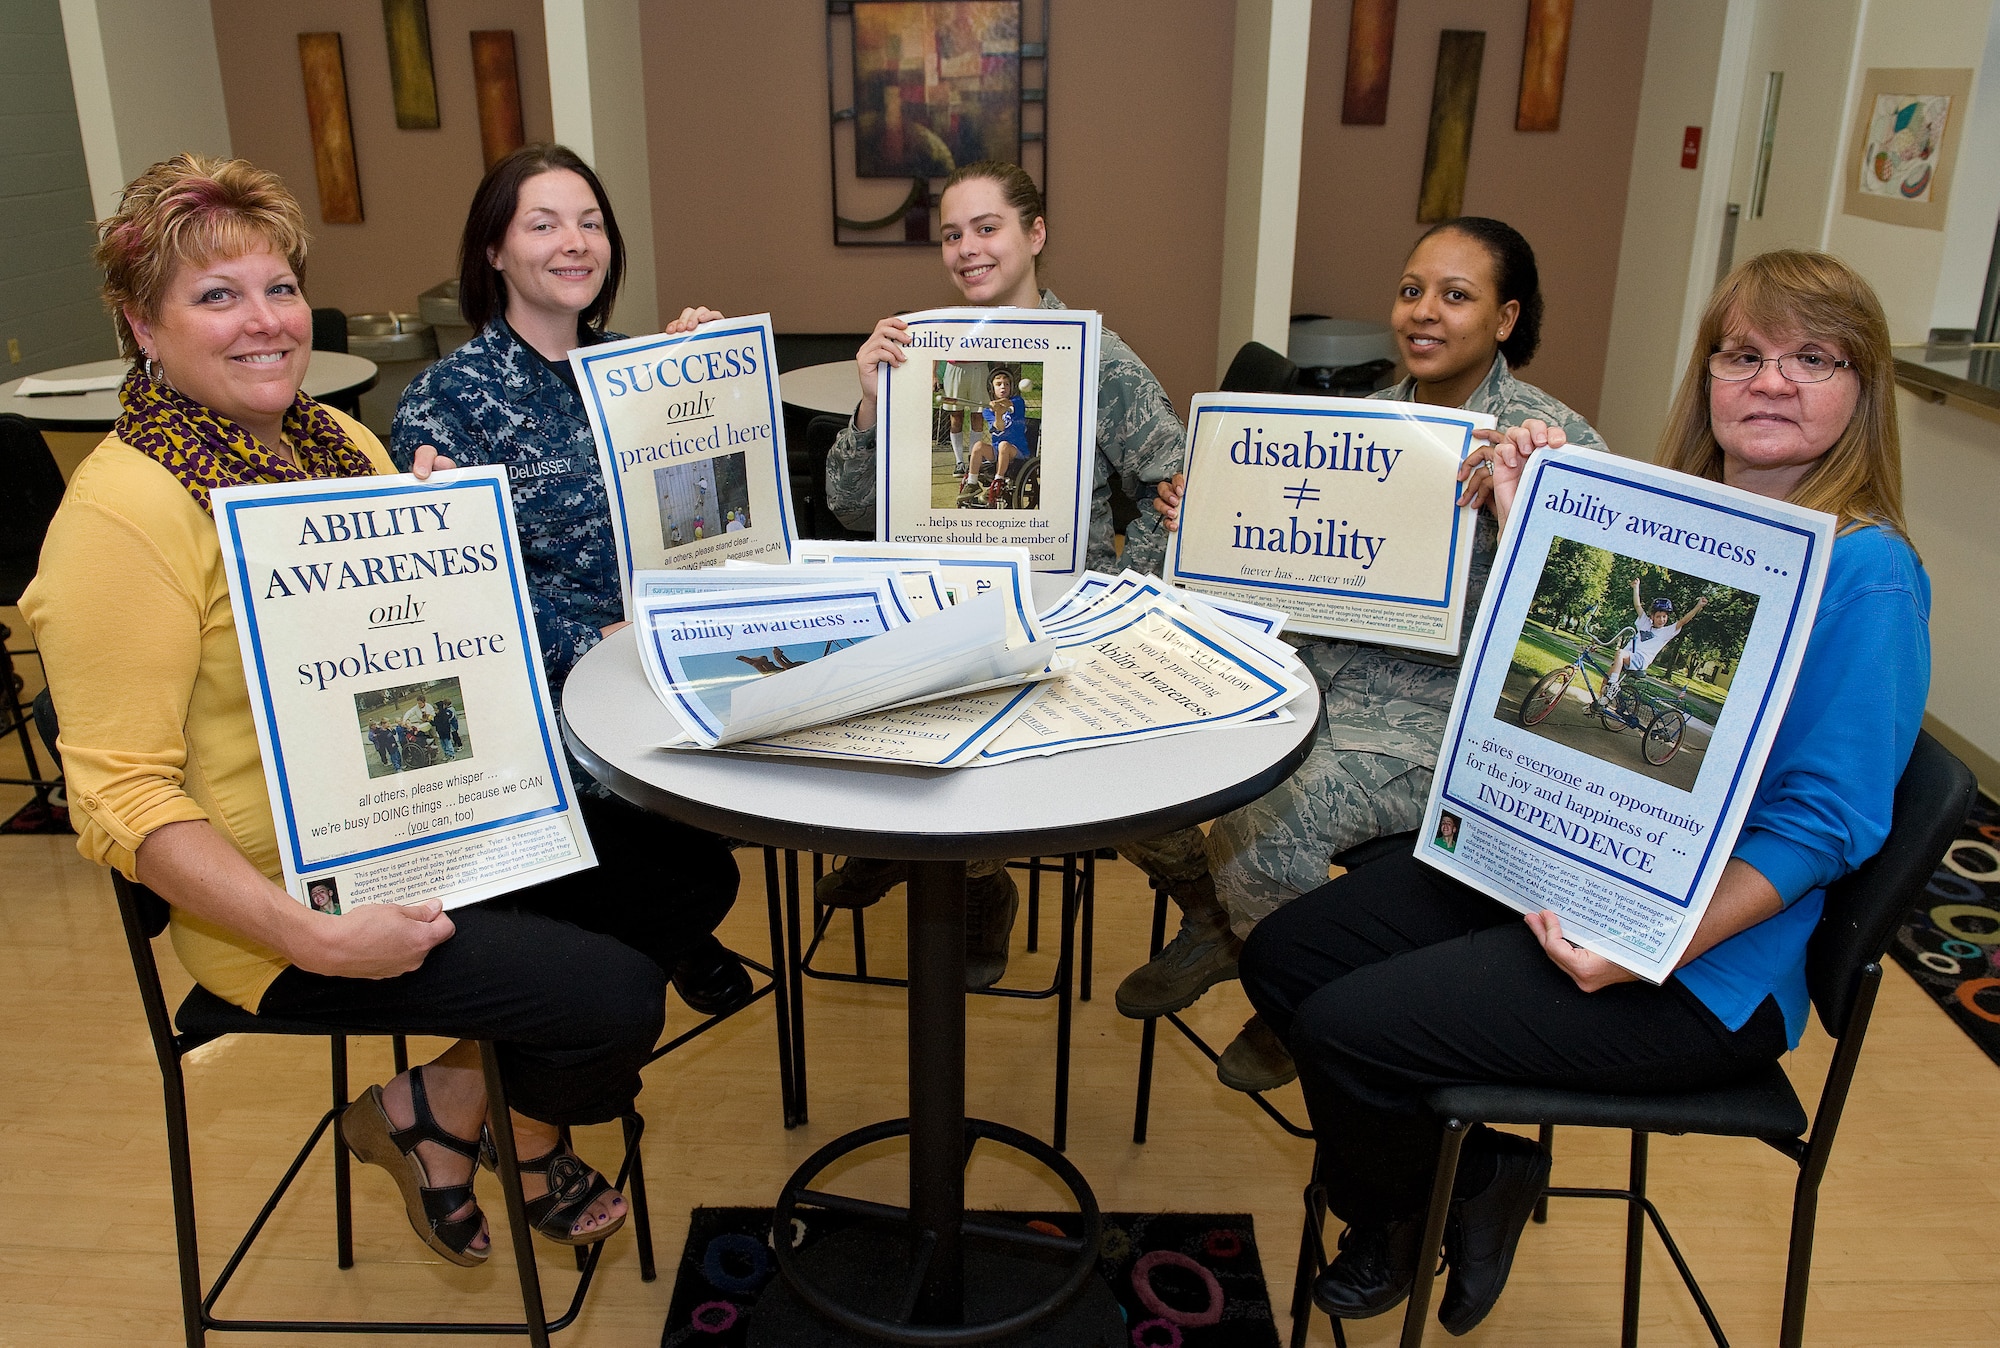 National Disability Employment Awareness Month committee members hold up ability awareness posters Oct. 7, 2014, at the Youth Center on Dover Air Force Base, Del. Committee members placed the posters in numerous work areas across the base as part of the effort to bring awareness to people having abilities rather than disabilities. (U.S. Air Force photo/Roland Balik)